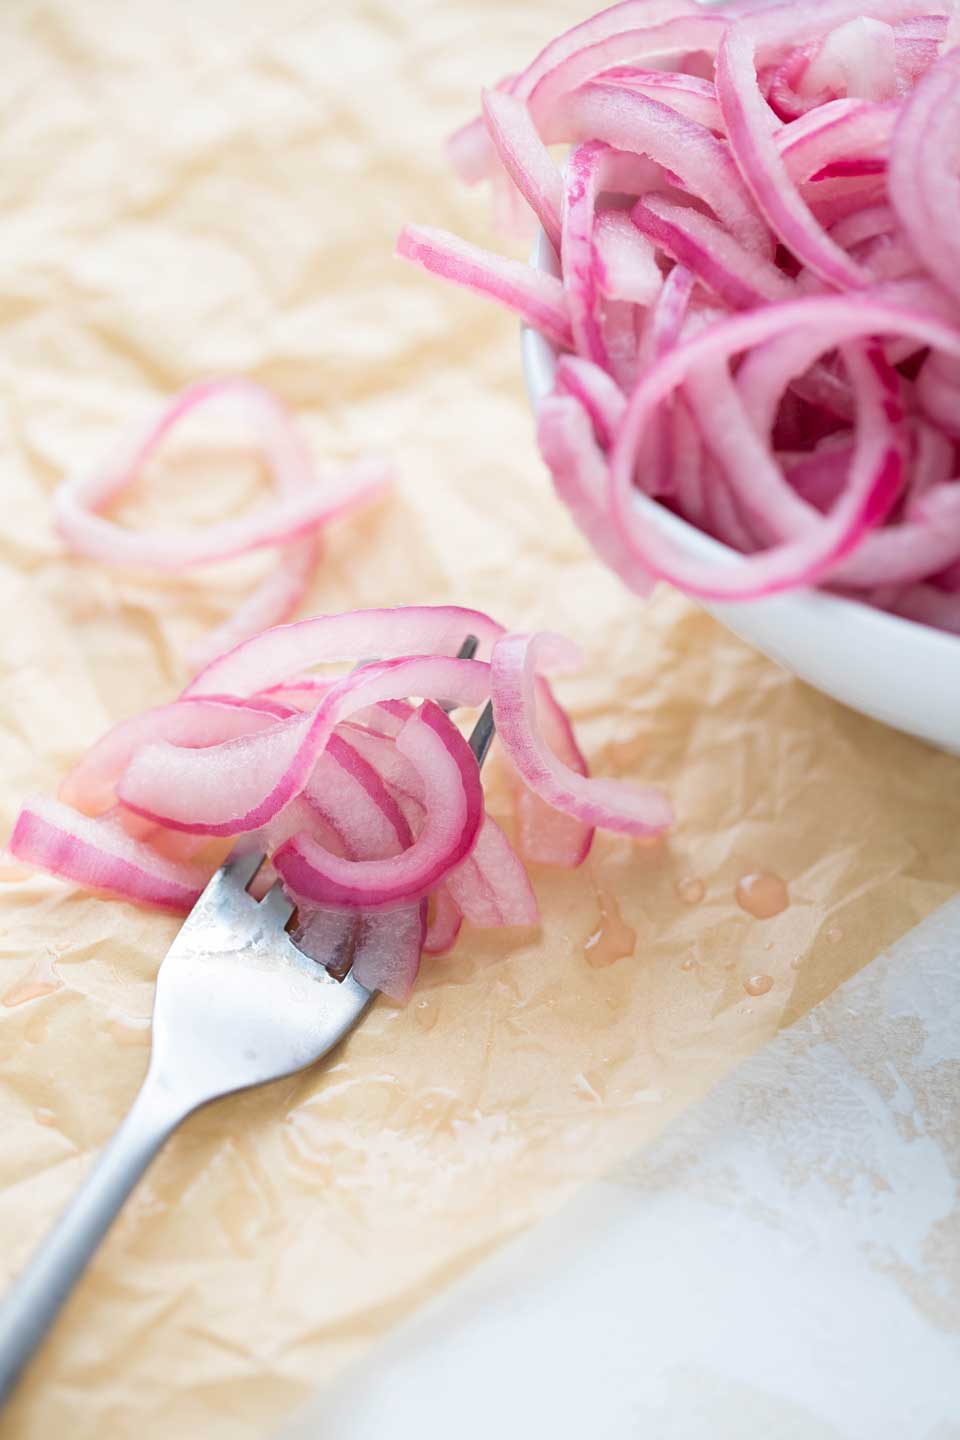 Just three ingredients is all you need for these amazingly flavor-packed Quick-Pickled Onions! They’re a surprisingly delicious twist, spread across our Rotisserie Chicken Tacos. But you’ve also gotta try them on sandwiches, salads … even hummus!